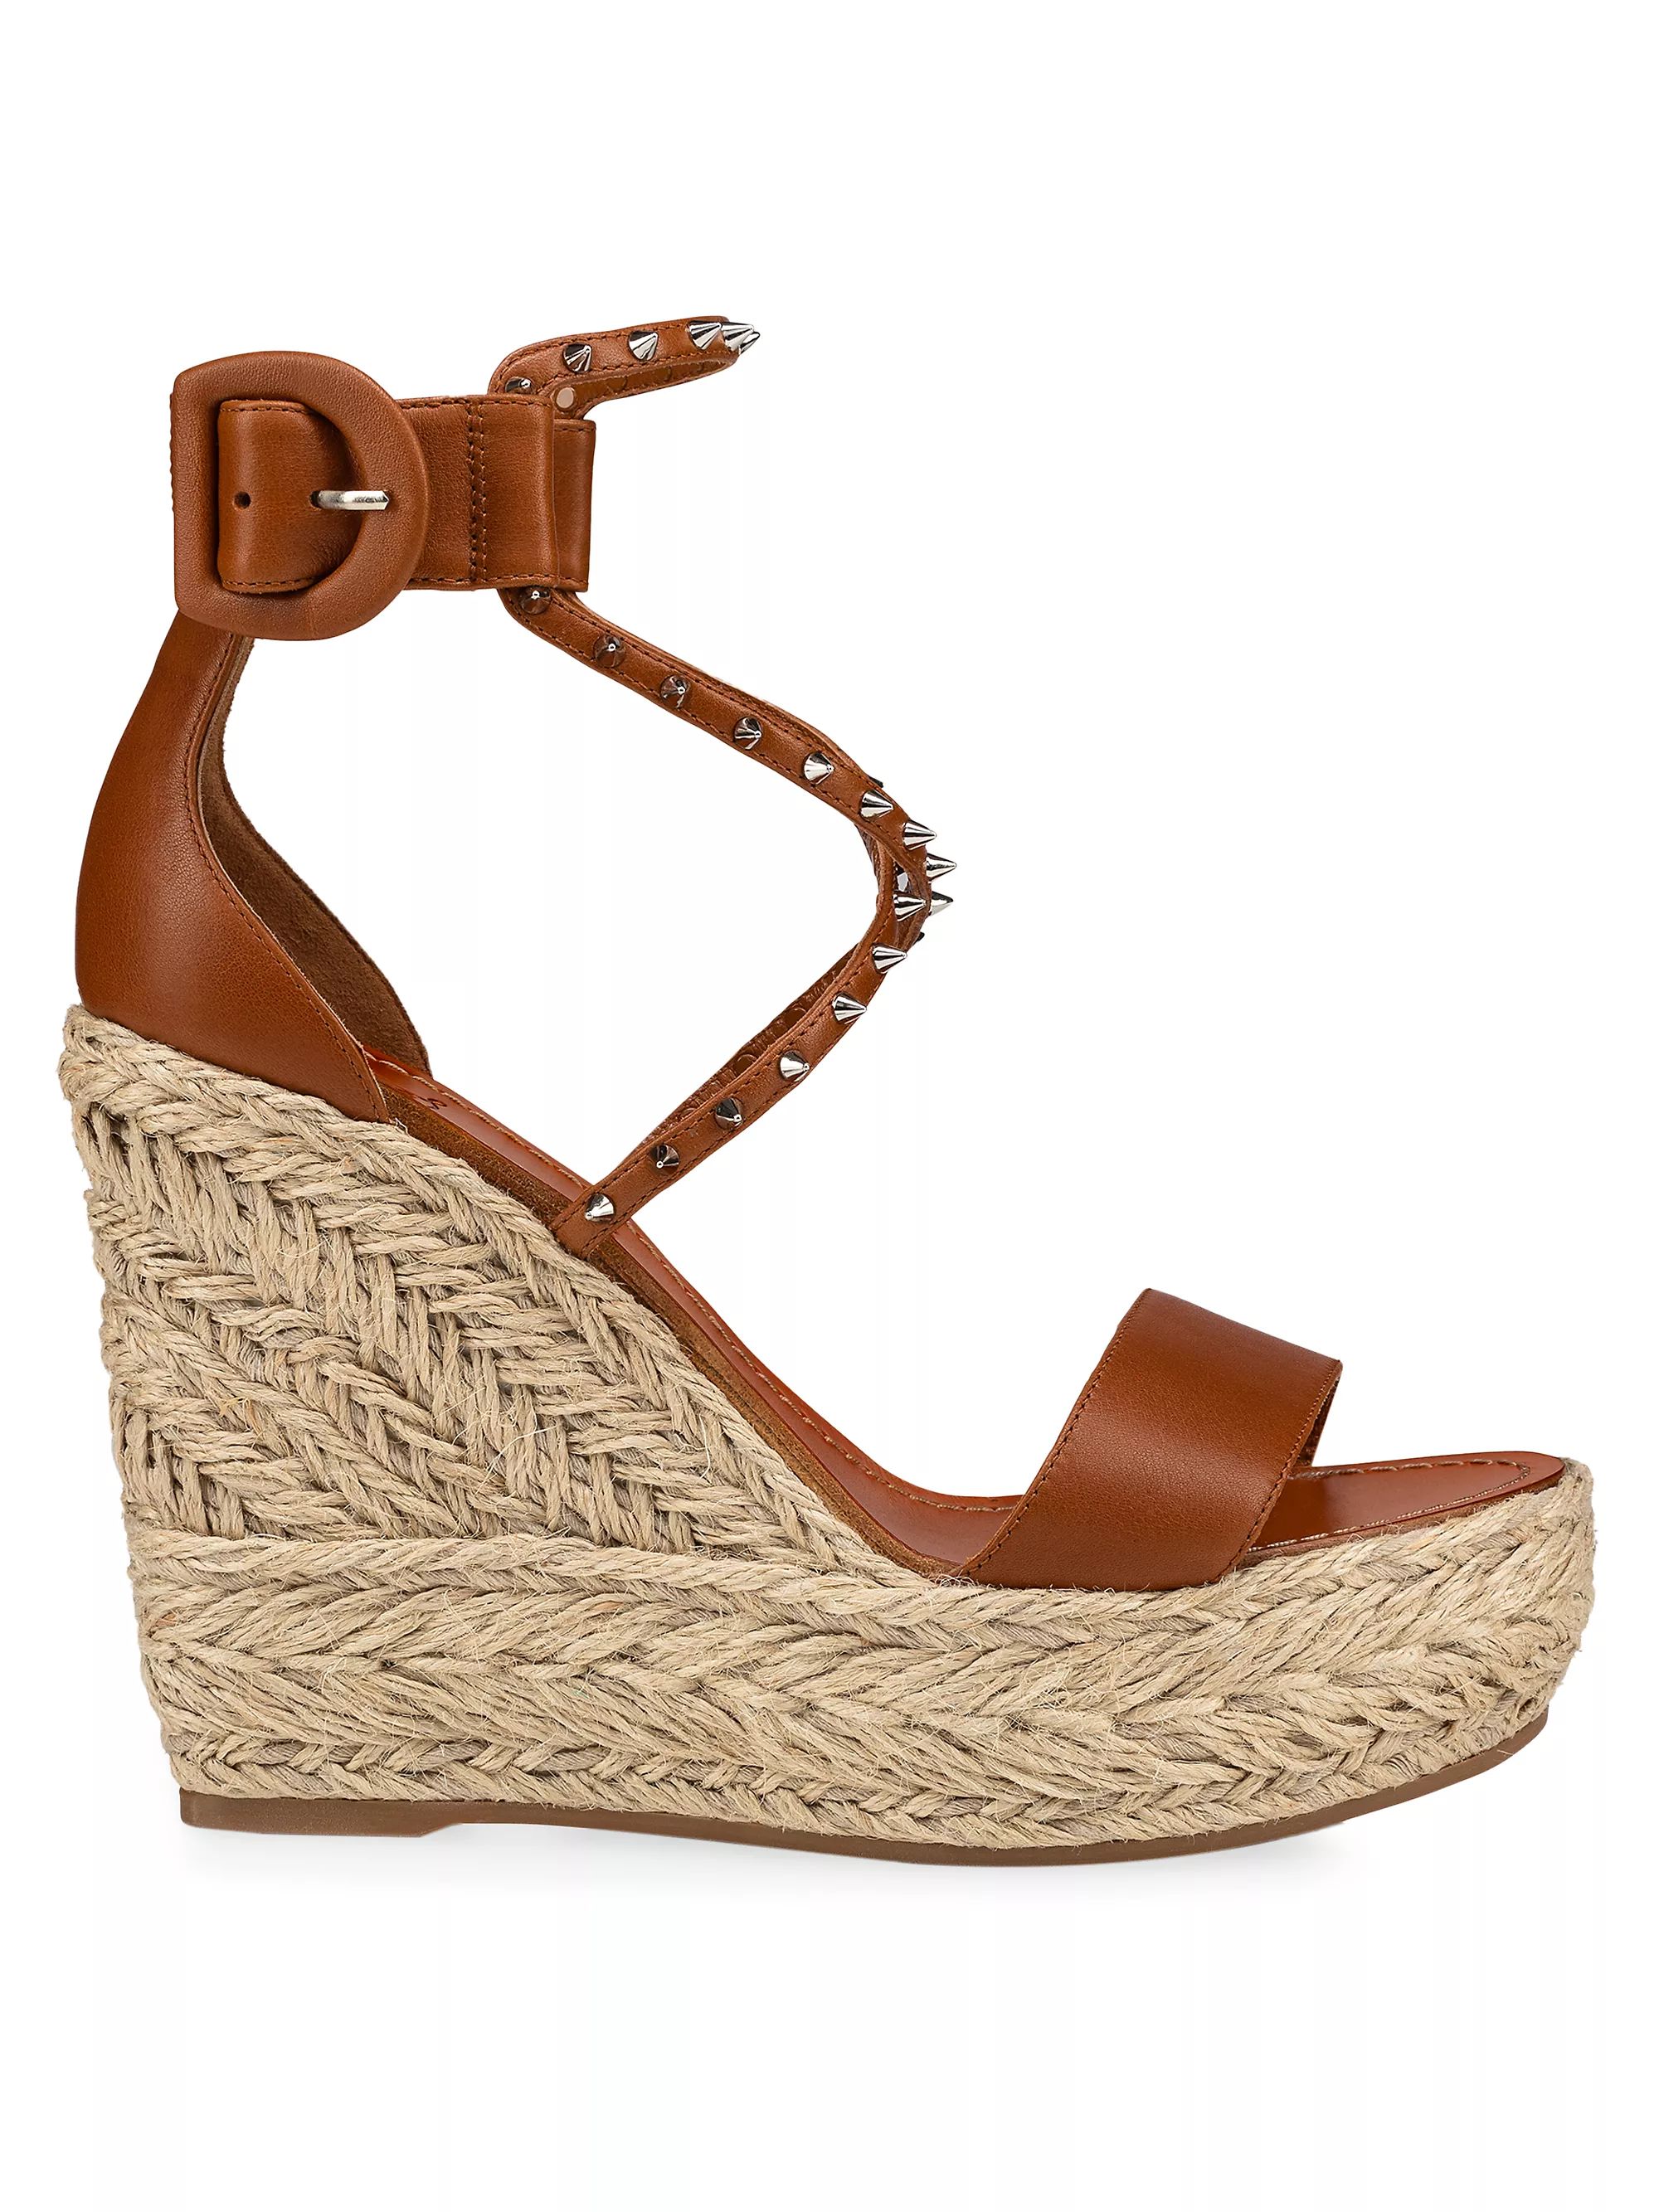 Chocazeppa 120MM Spiked Leather Espadrille Wedge Sandals | Saks Fifth Avenue